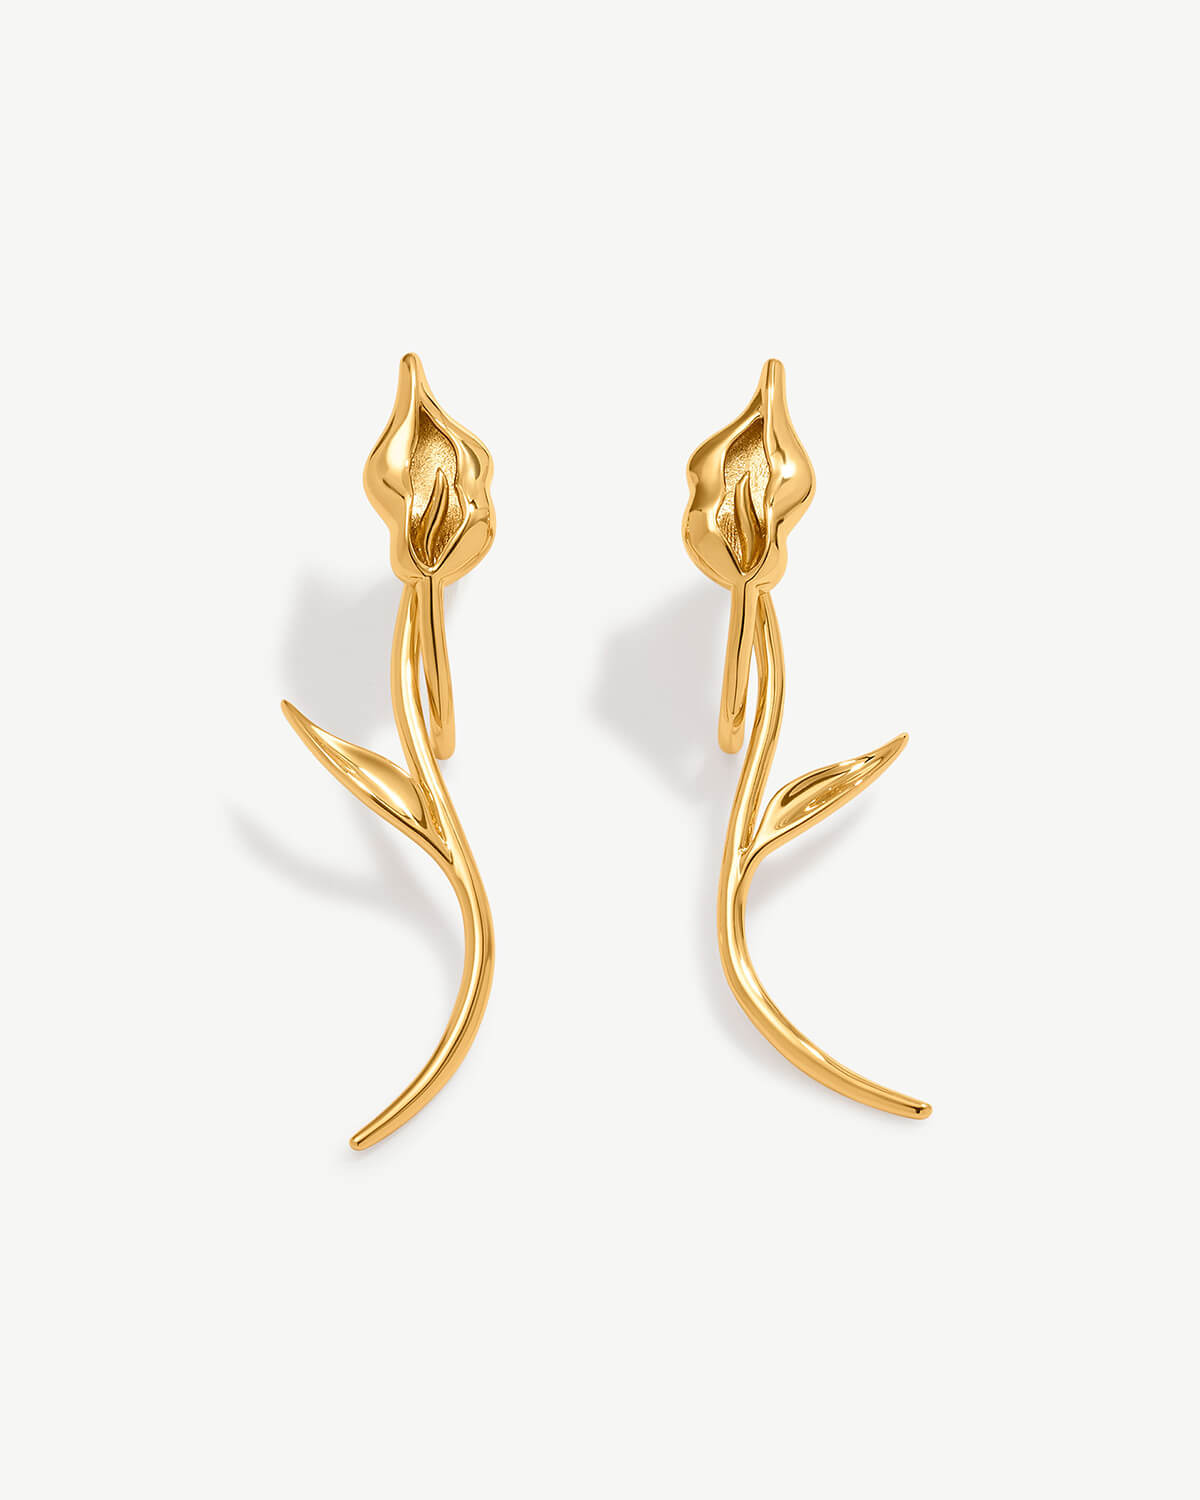 a pair of gold earrings with a flower design